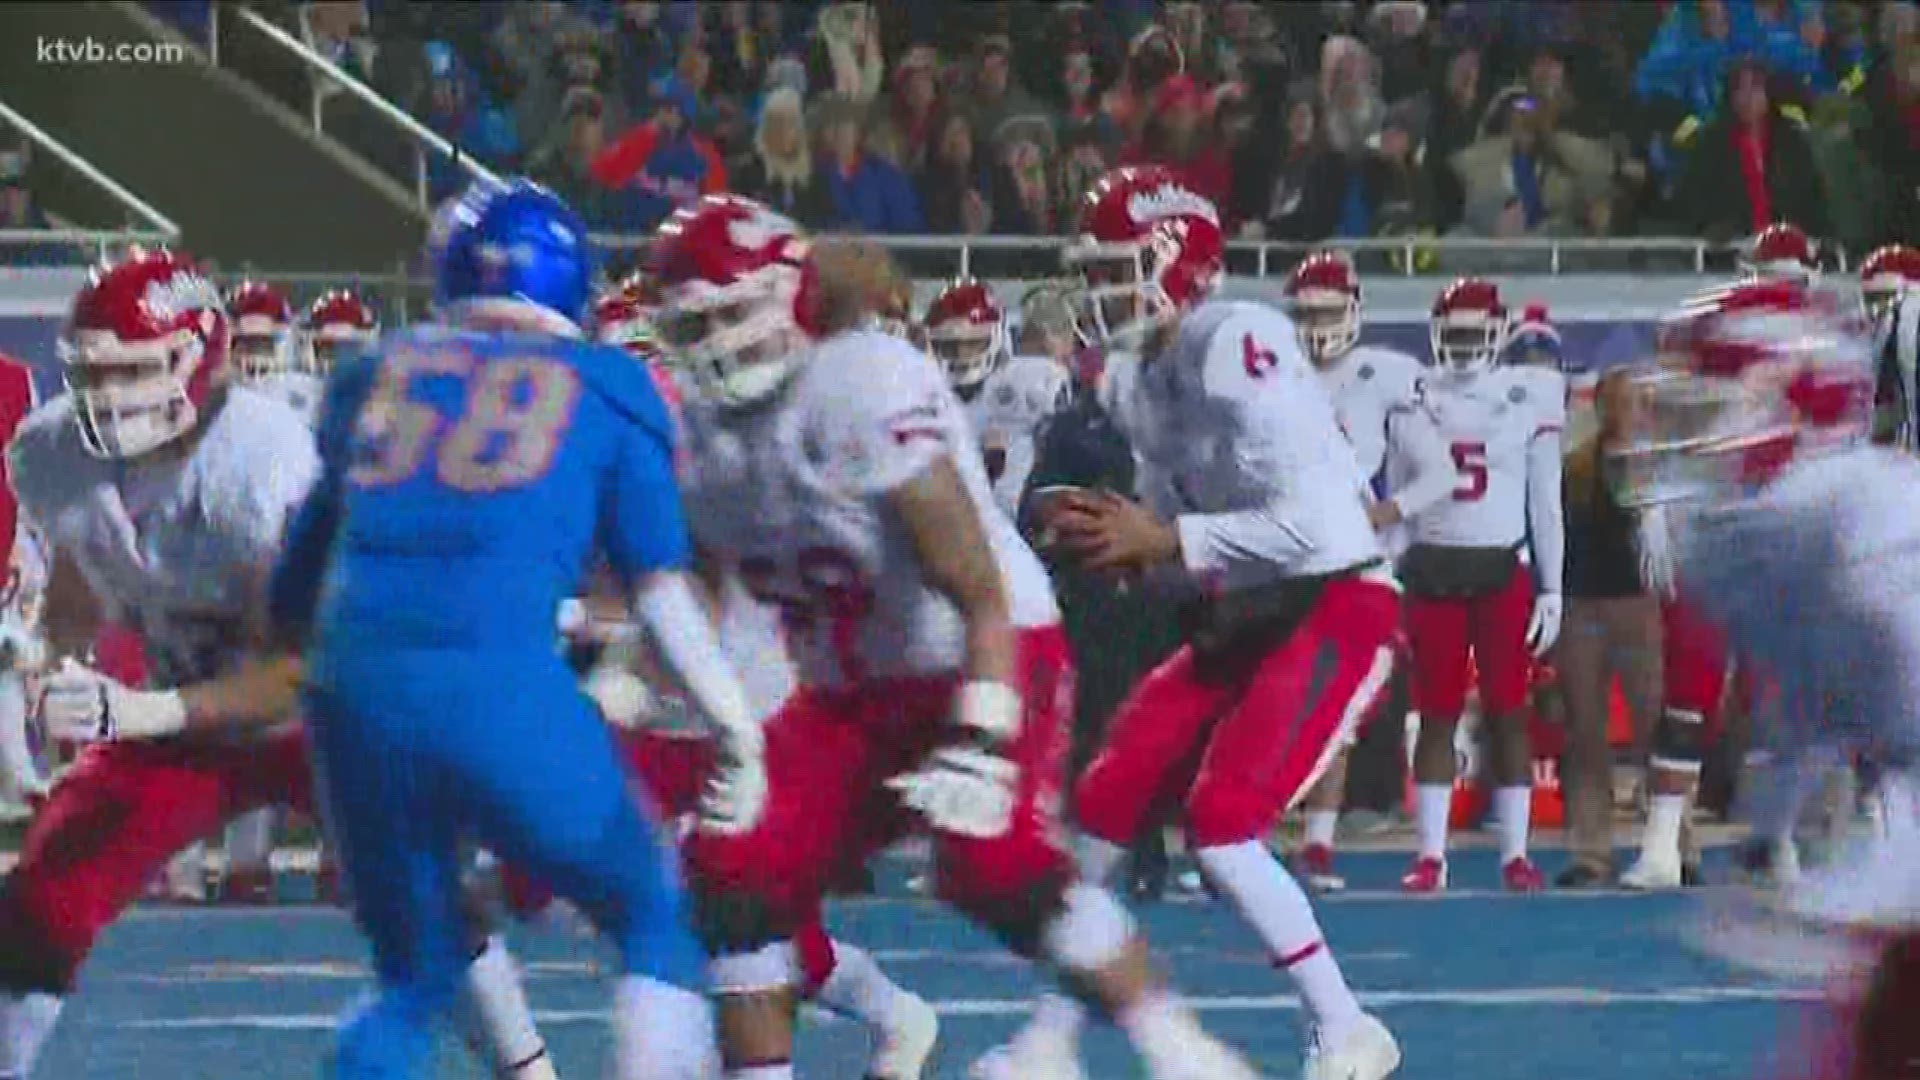 Boise State vs. Fresno State in the 2018 Mountain West Championship game. The Broncos fell in overtime, 19-16.